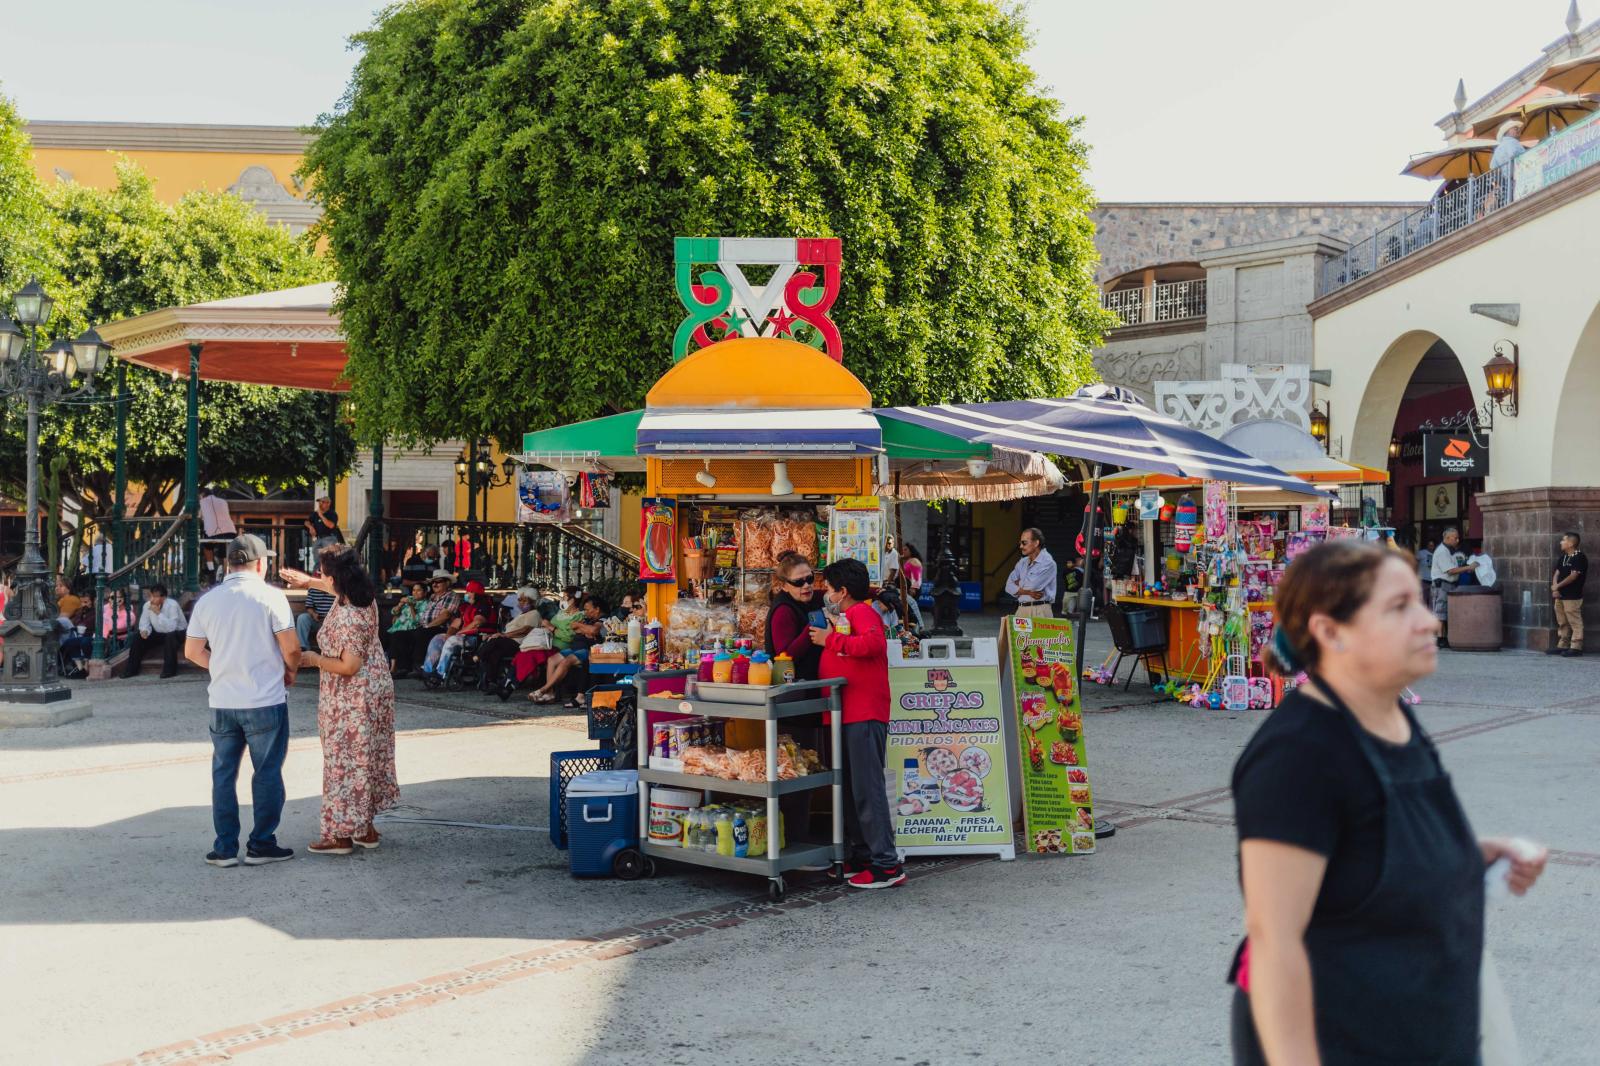 Image from Plaza Mexico - Plaza Mexico has a gazebo in the front of the main...